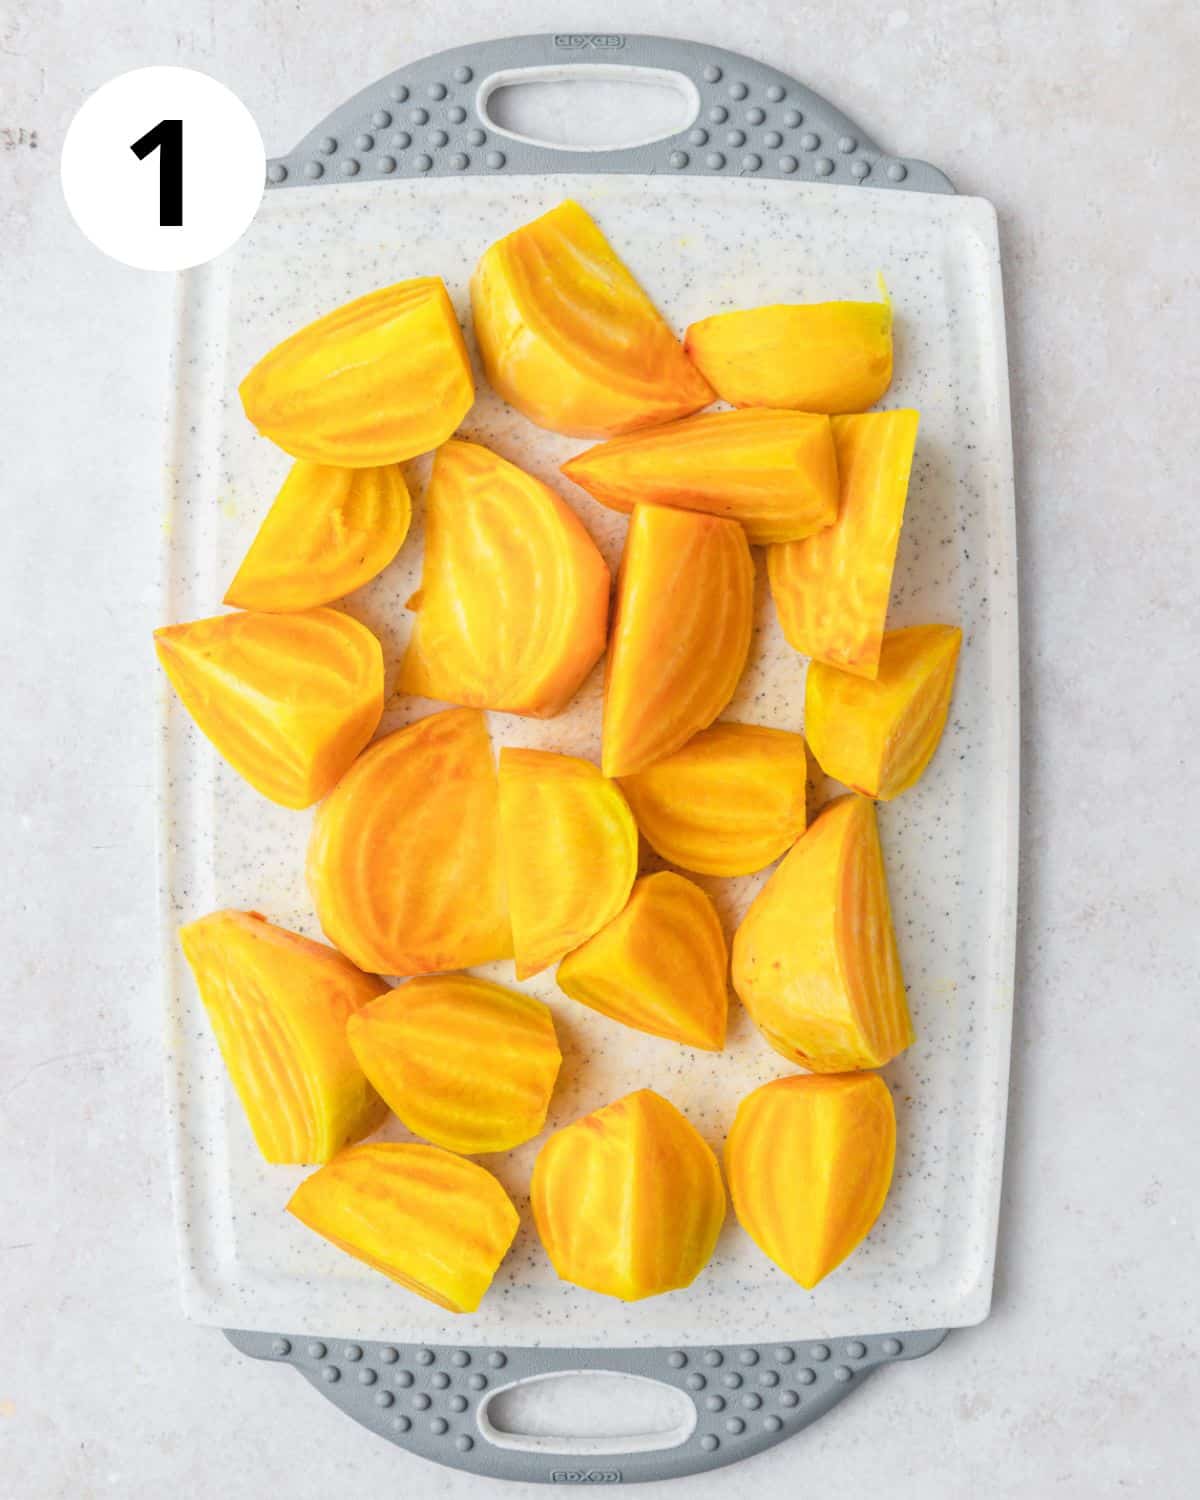 peeled and sliced golden beets.